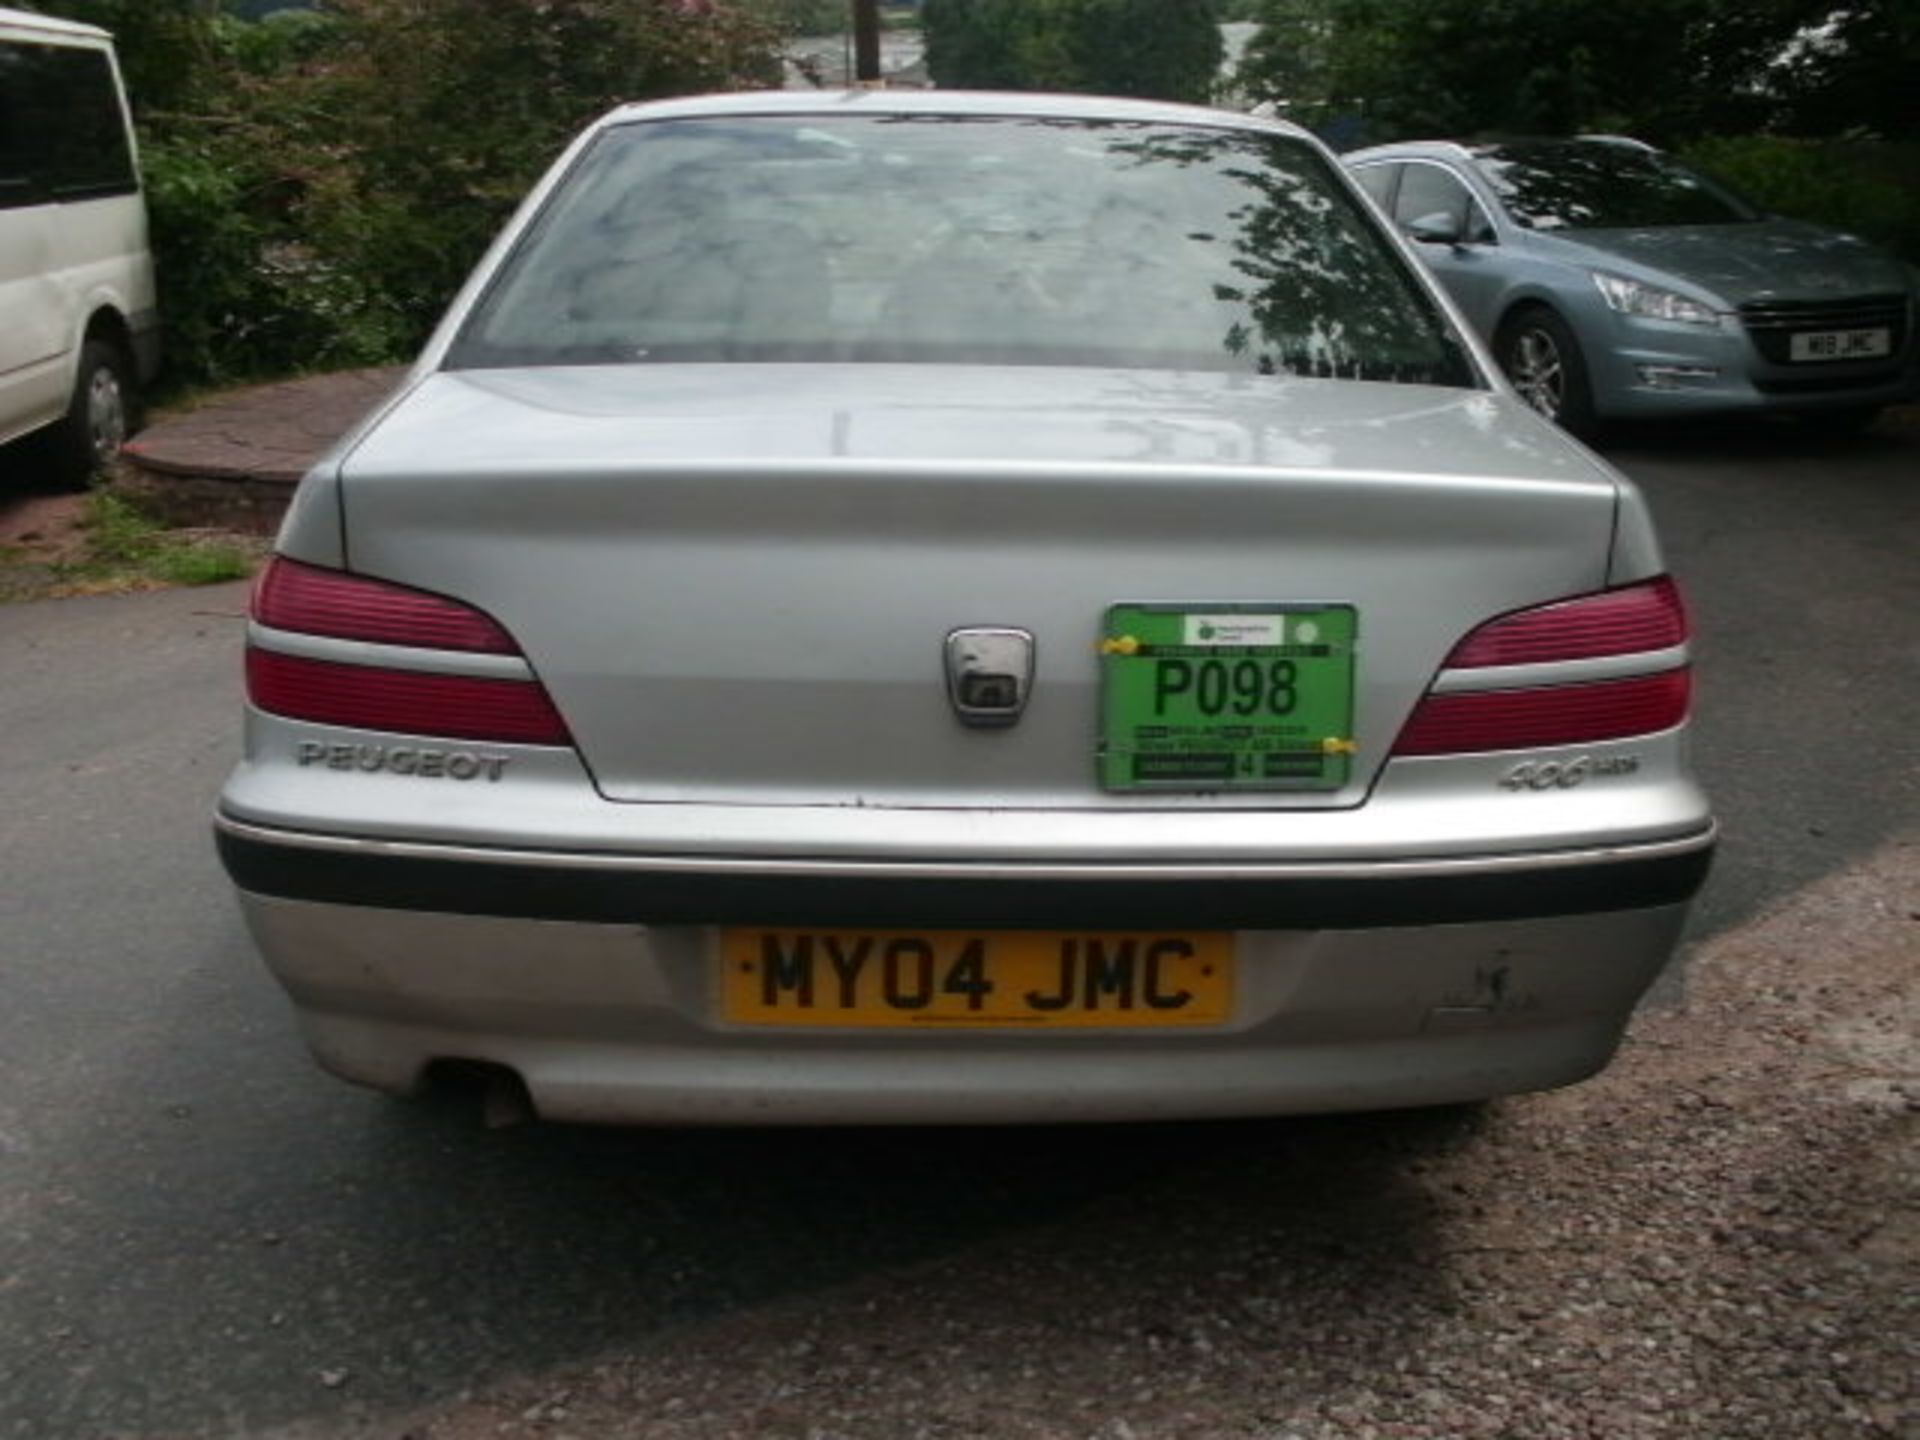 2004 (March) PEUGEOT 406 SHDi (90) 4 door saloon, silver, diesel, 1997cc, 402,835 miles recorded, - Image 4 of 4